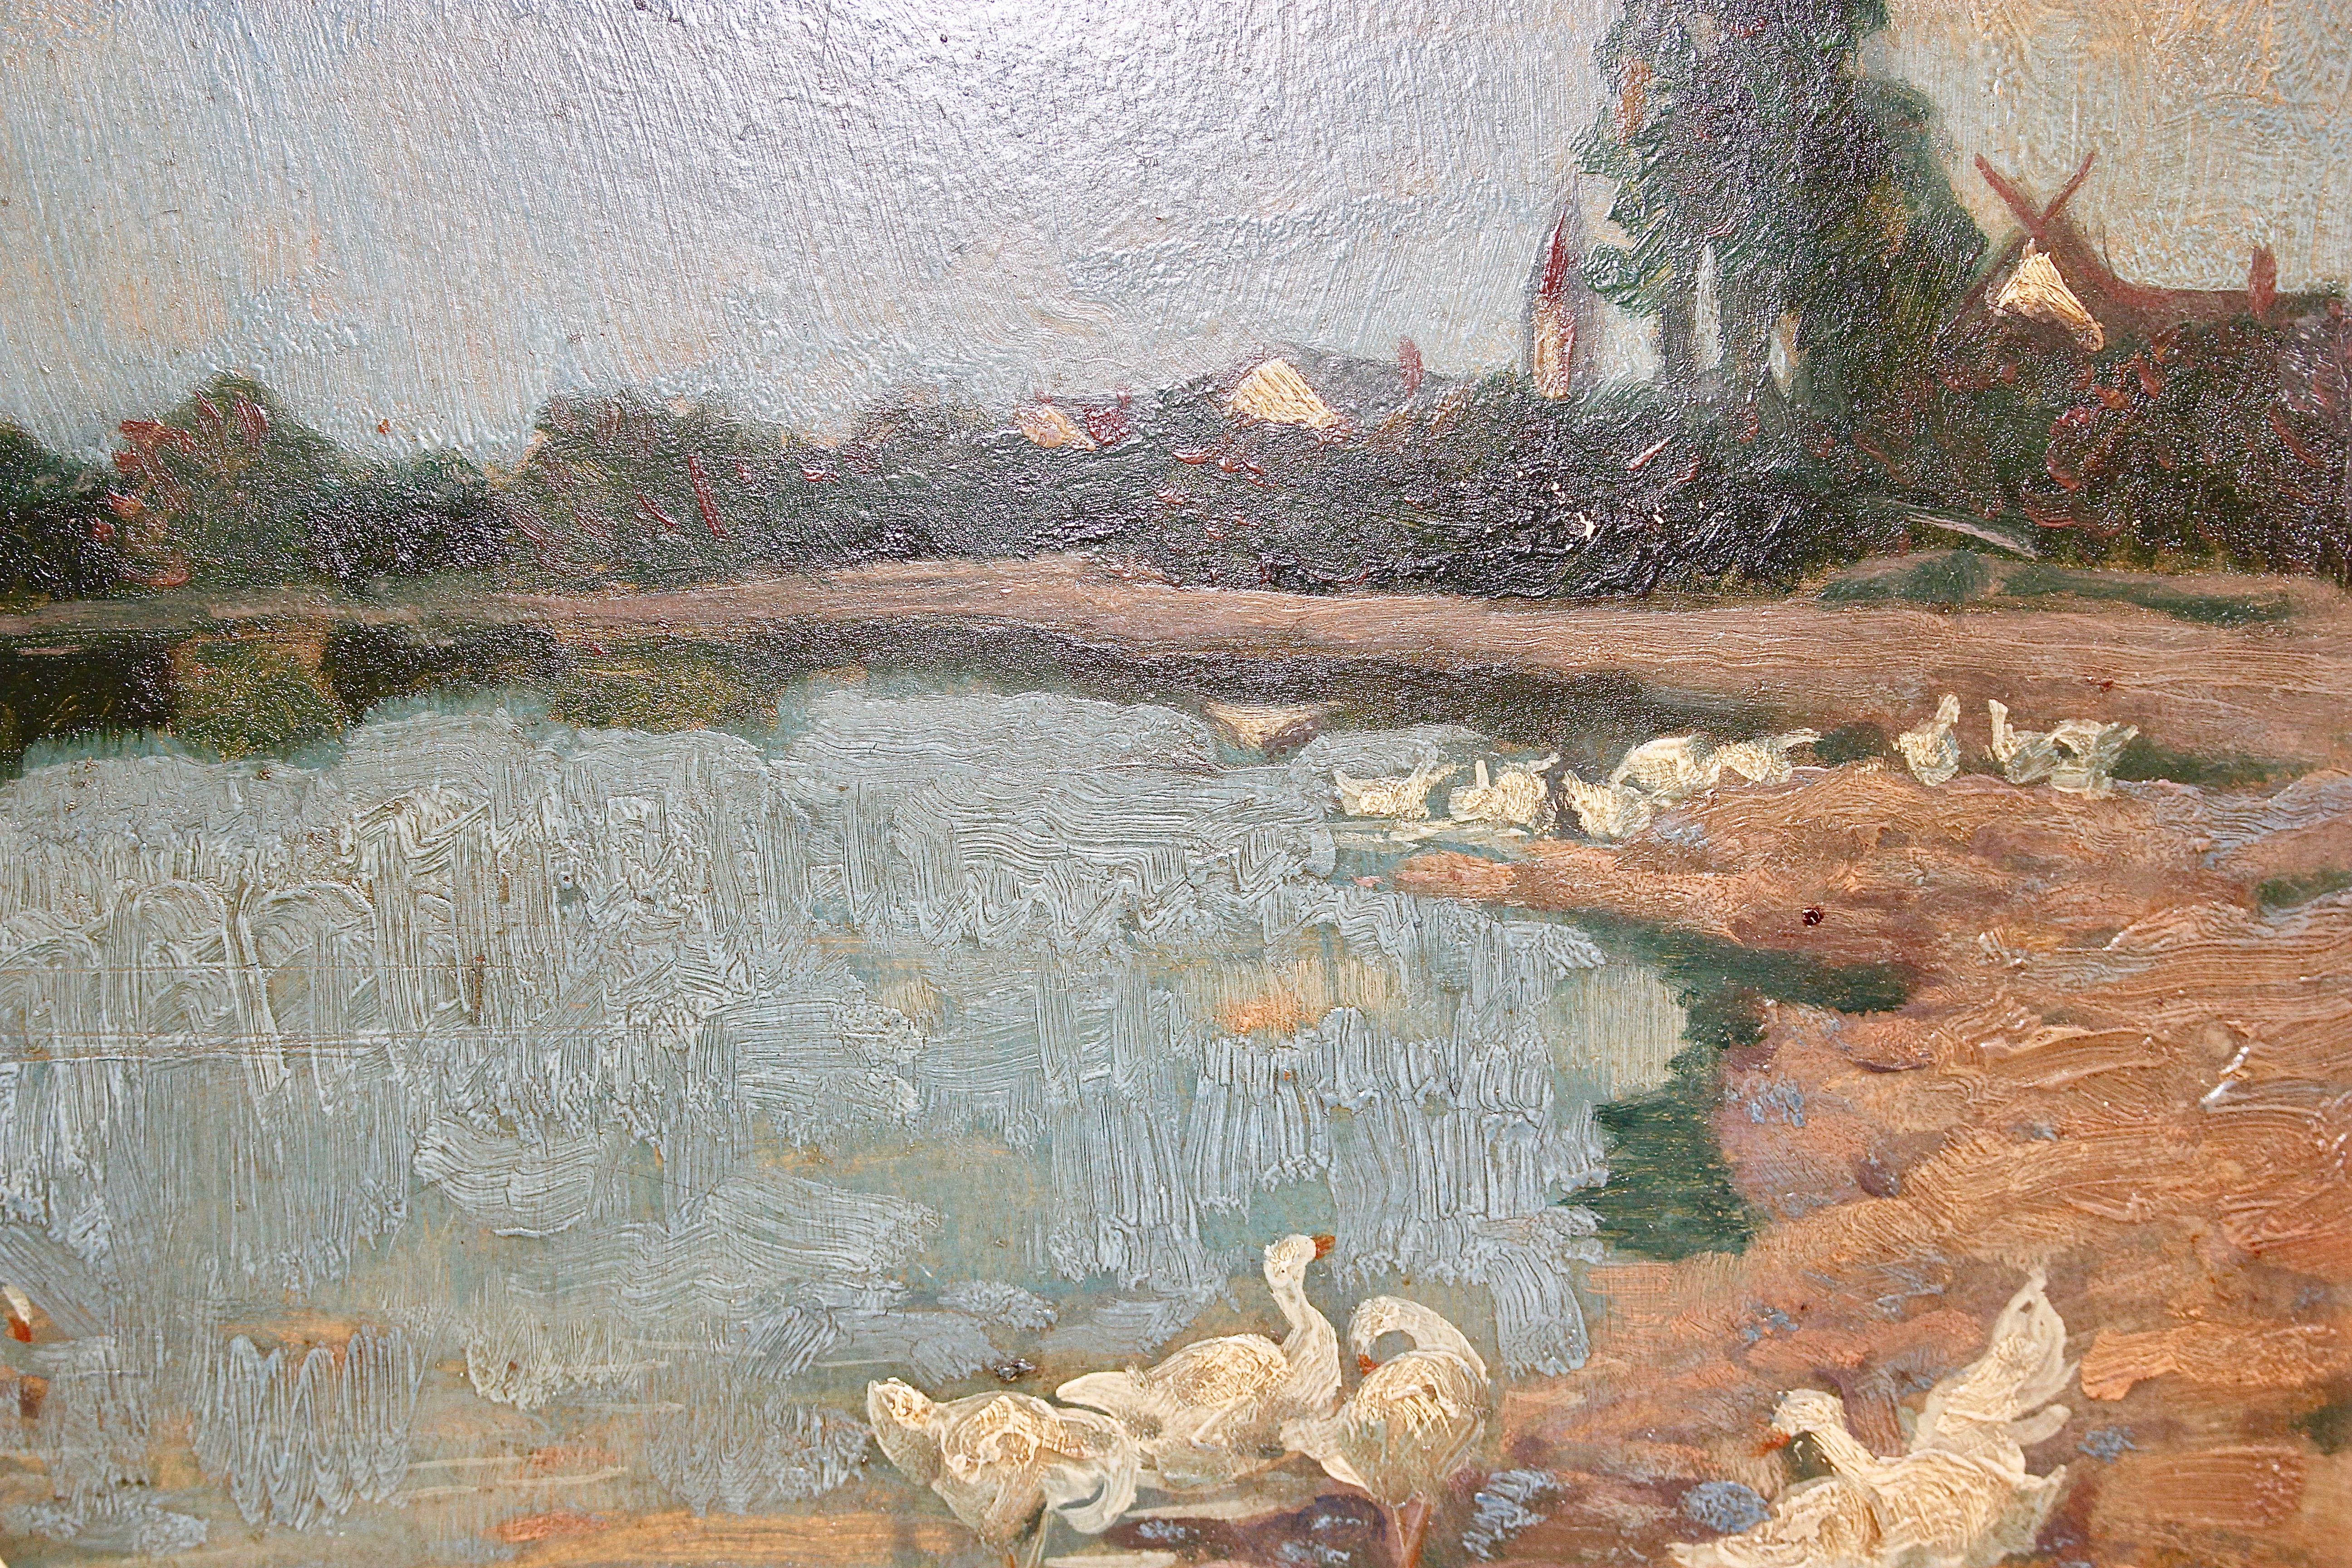 Oil painting, 19th century, seascape with ducks.

Age-related condition.
Dimensions with frame.